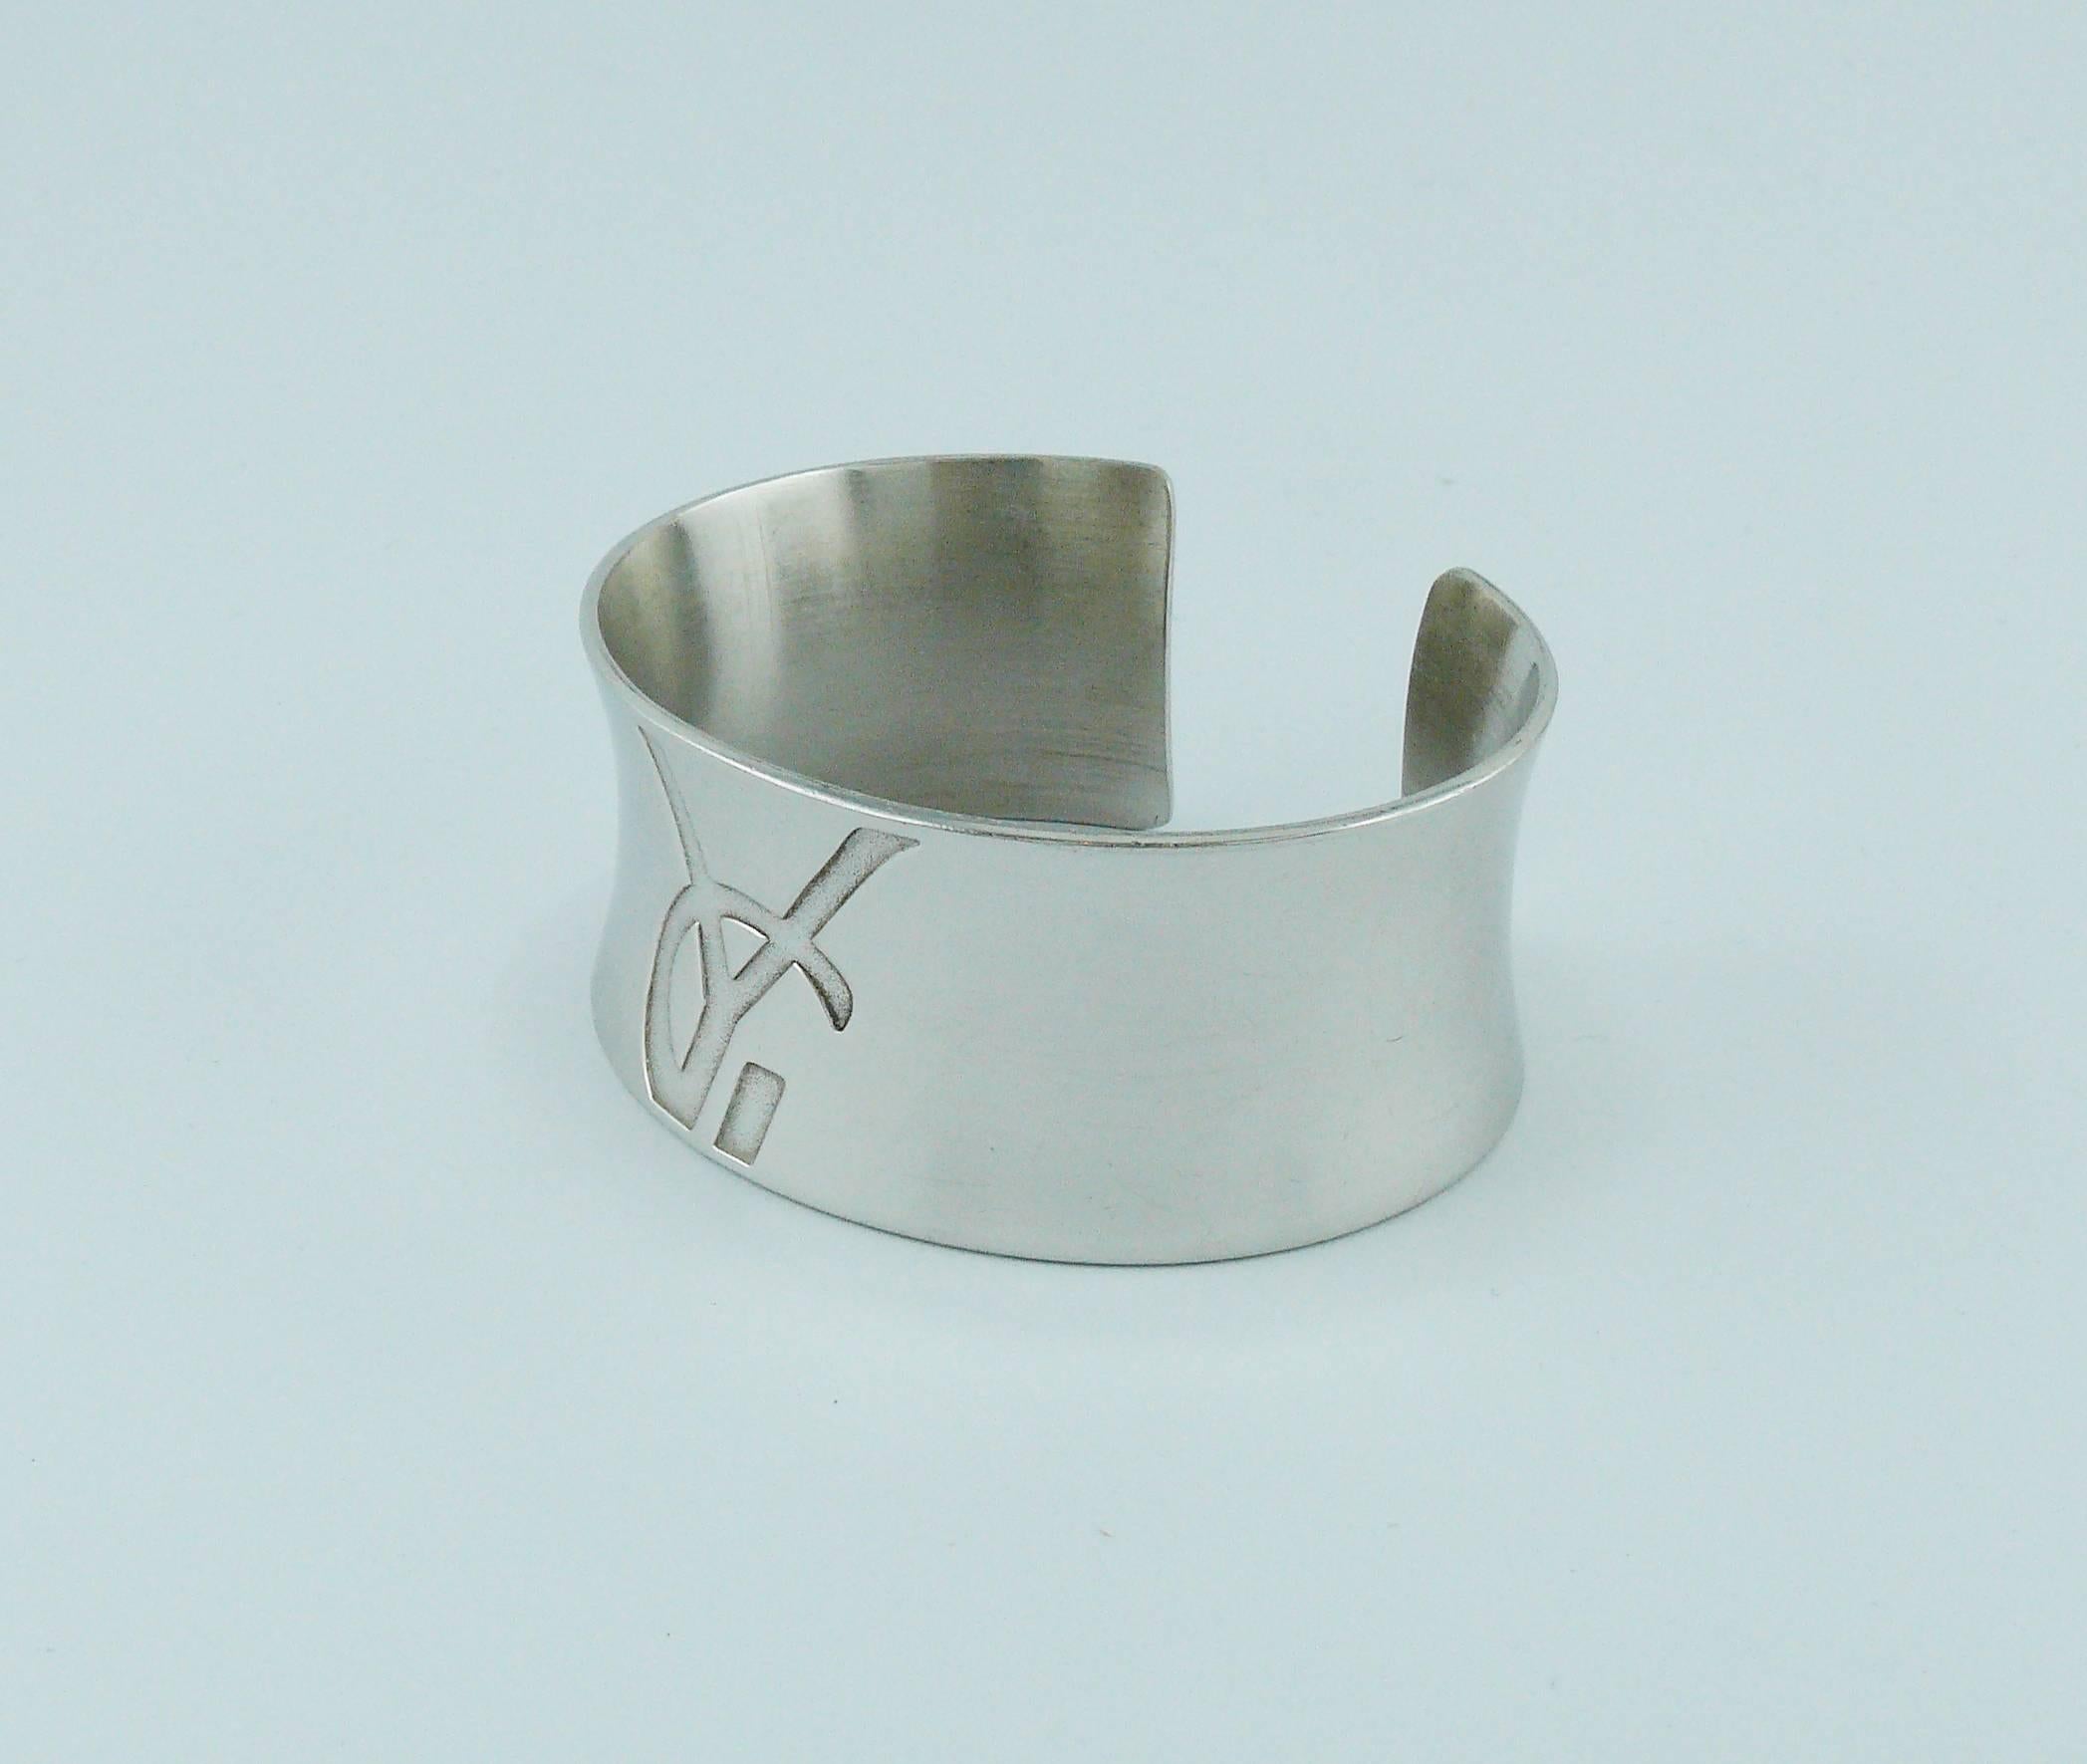 YVES SAINT LAURENT vintage sterling silver cuff bracelet embossed with YSL monogram at front.

French silver hallmark 